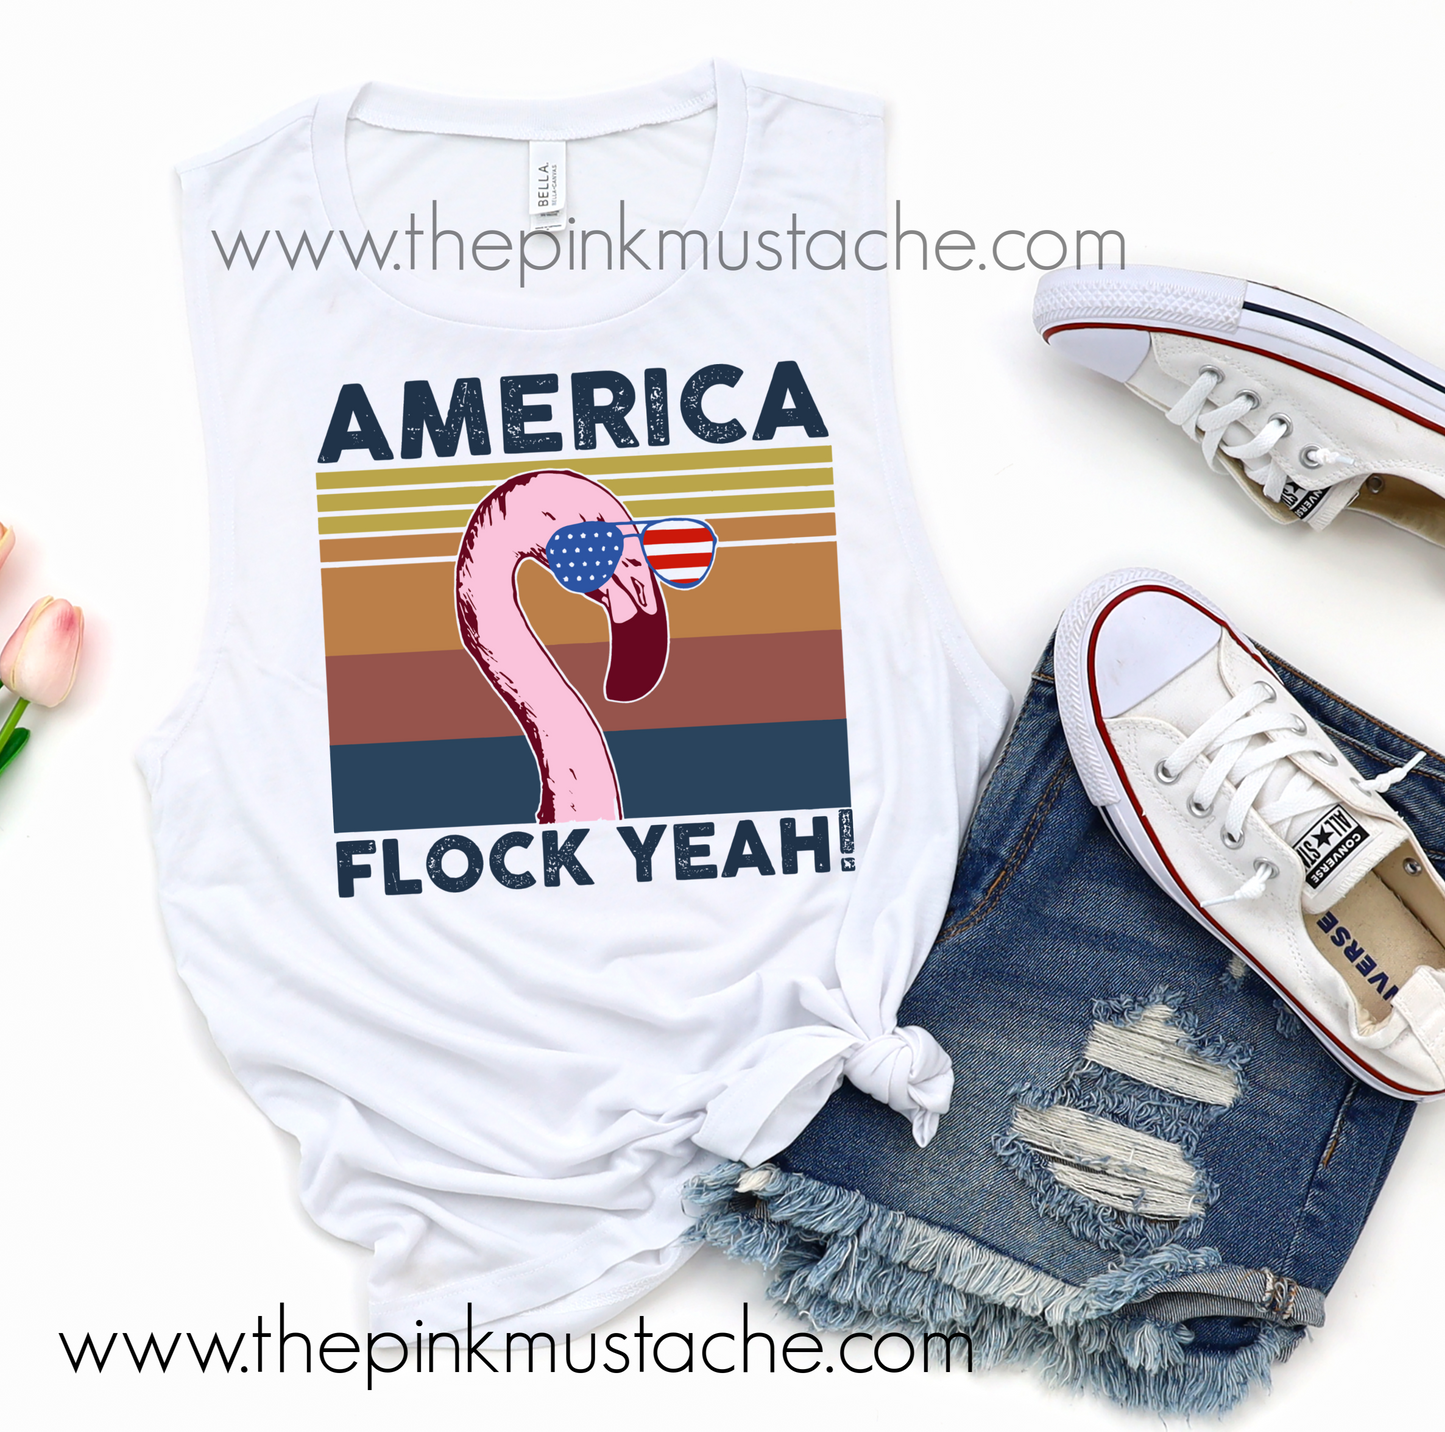 America Flock Yeah Flamingo Muscle Tank / Muscle Tank Top / Mens or Womens Cut Tank Available